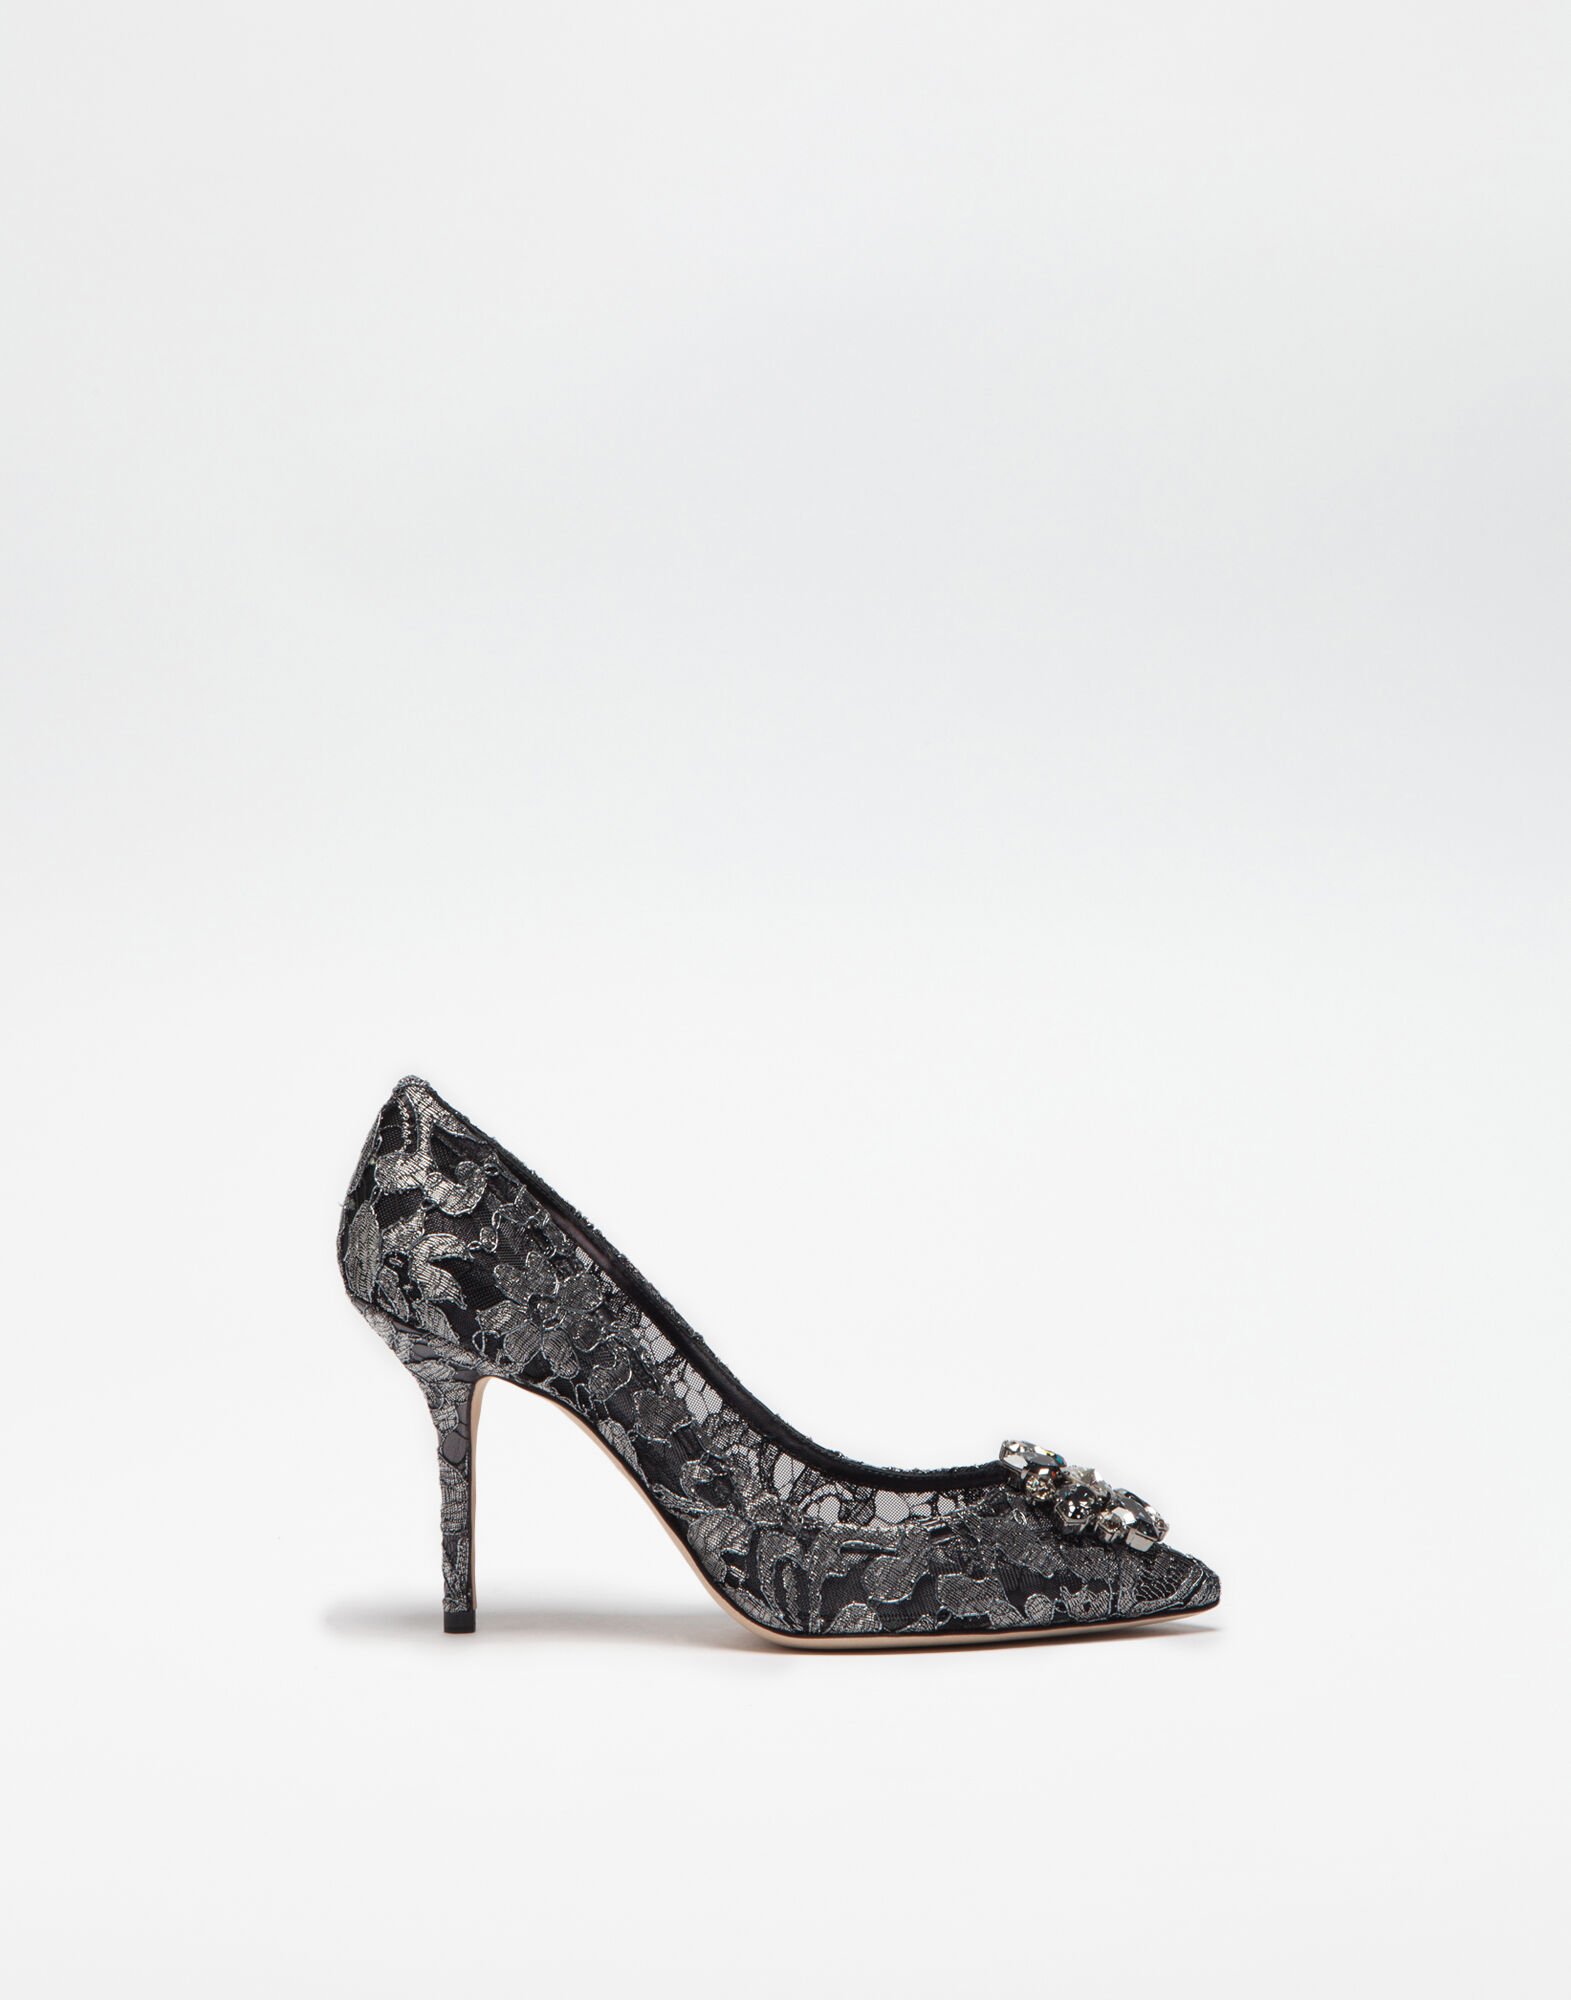 Dolce & Gabbana Lurex lace rainbow pumps with brooch detailing Grey CD0066AE637